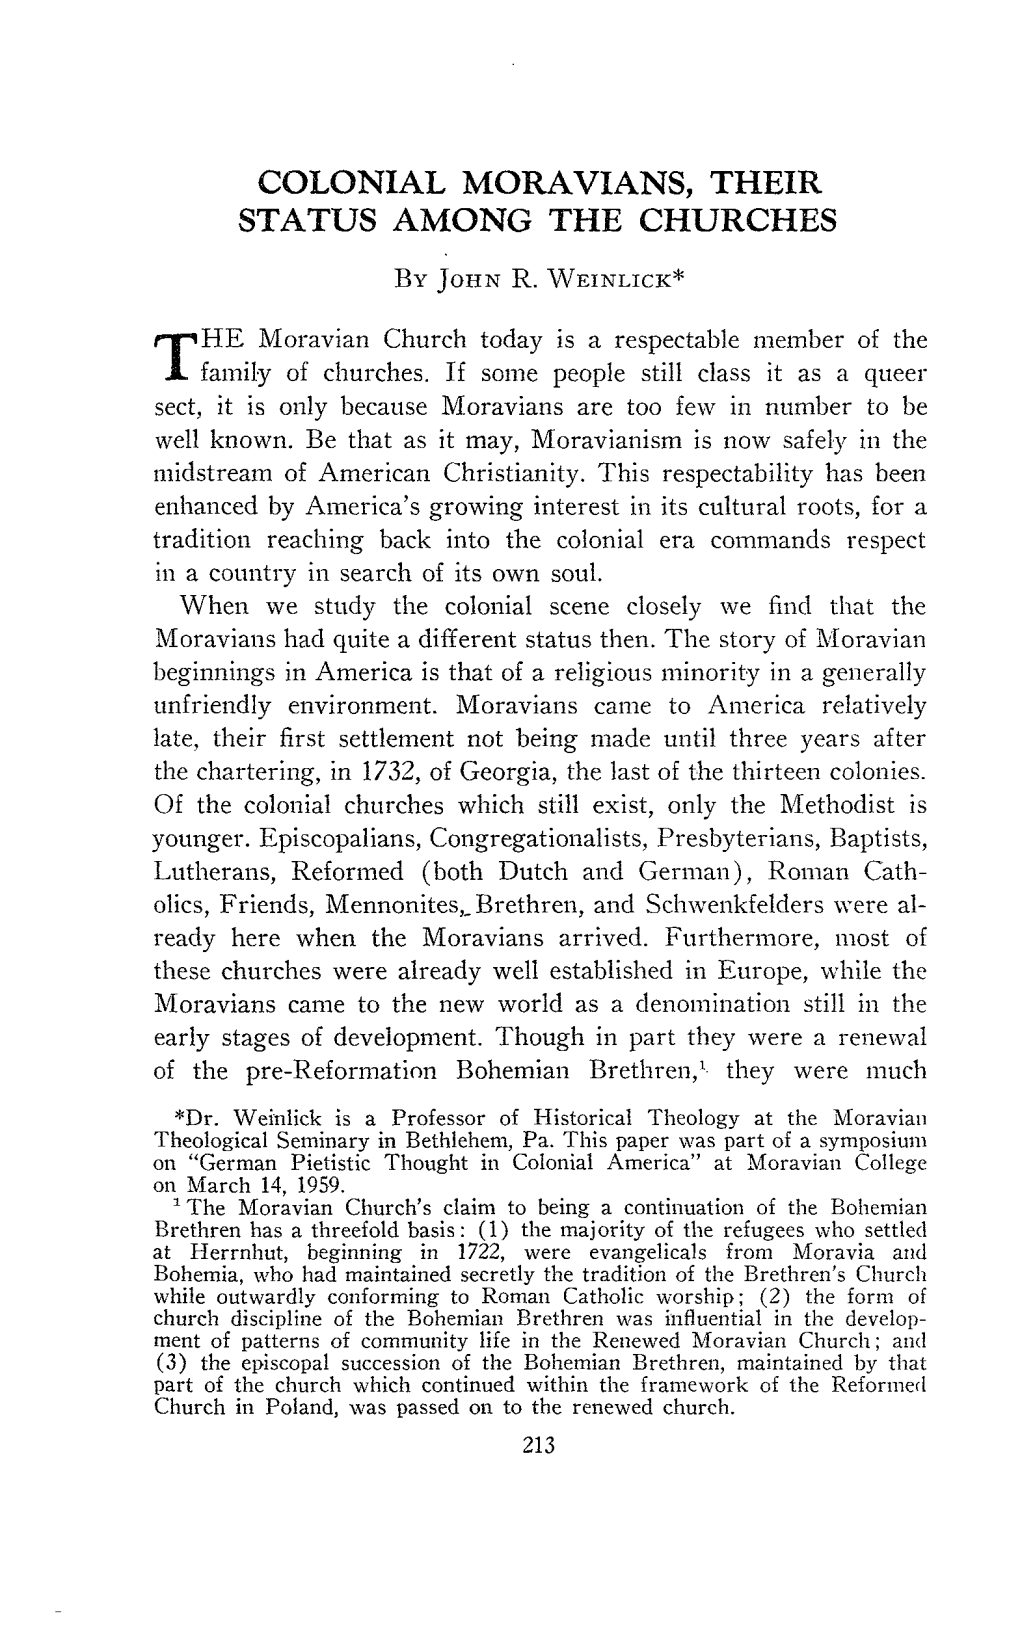 Colonial Moravians, Their Status Among the Churches